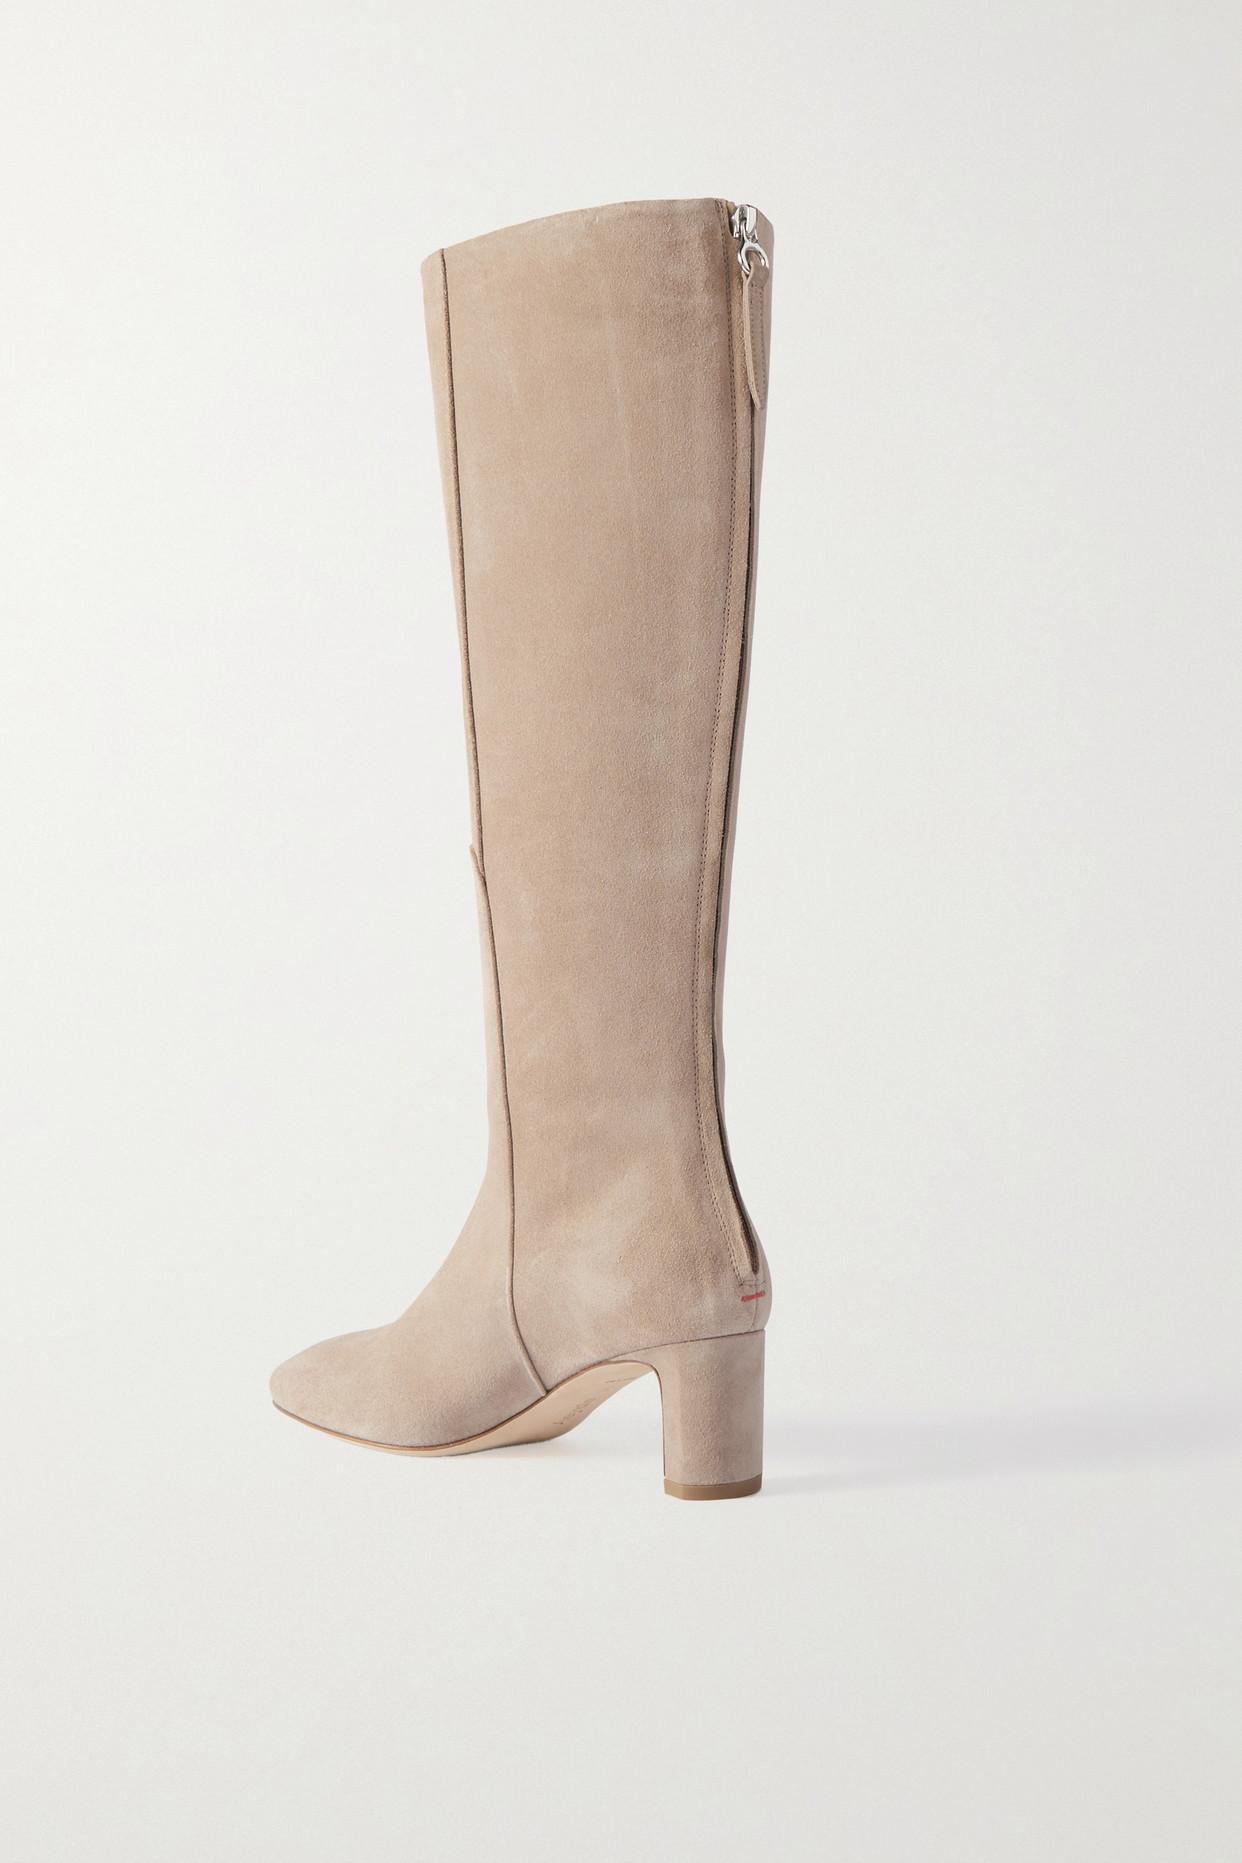 Aeyde Taylor Suede Knee Boots in White | Lyst